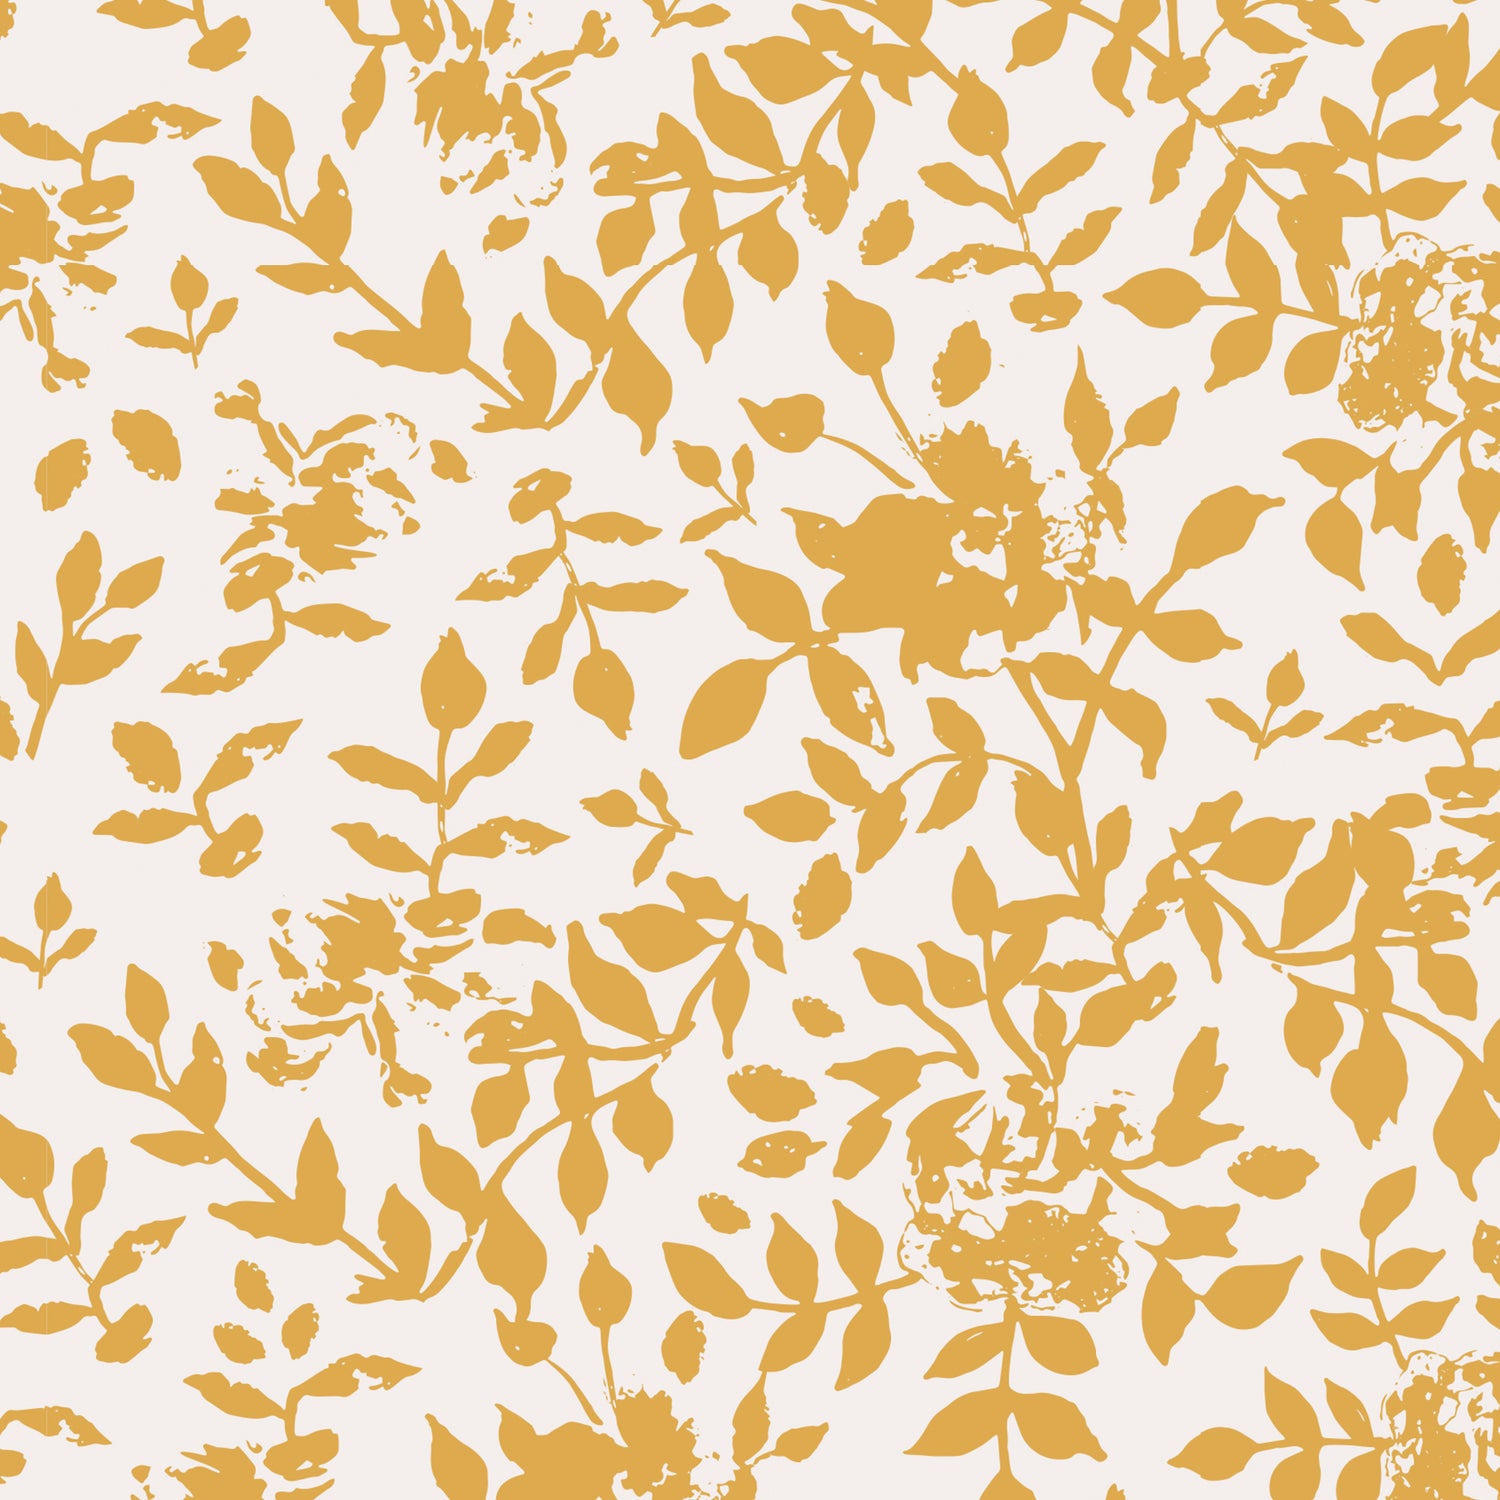 Close up of our Florence Peel and Stick Wallpaper in Ochre yellow and white by Jackie O'Bosky. These floral silhouettes make a beautiful accent wall or statement wall!